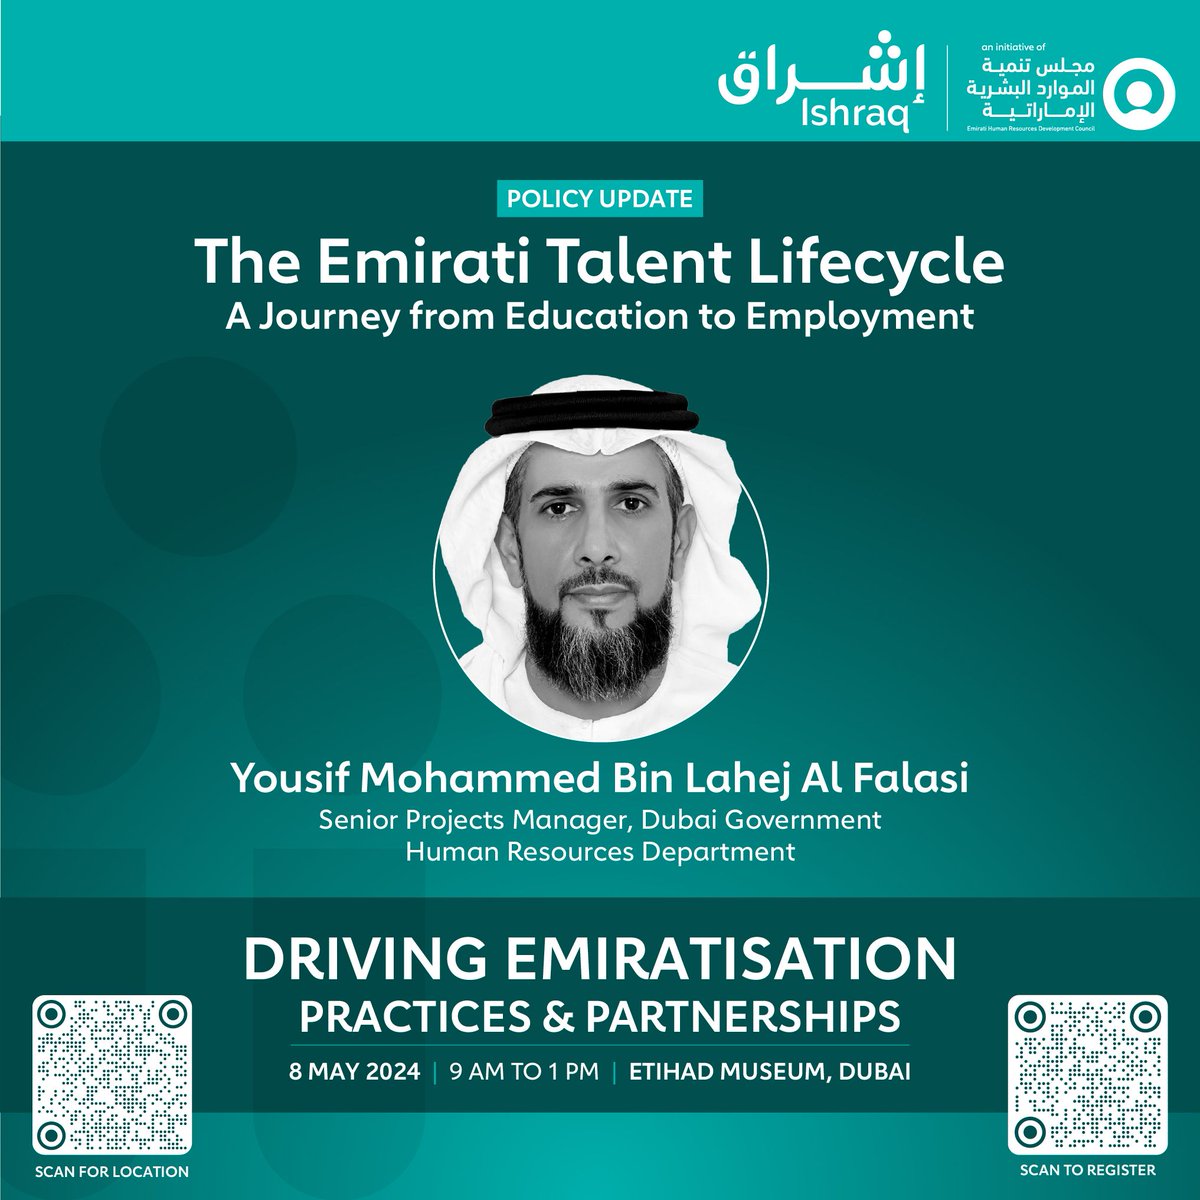 Join us for a pivotal policy update on the Emirati Talent Lifecycle!

Explore the journey from education to employment with Yousif Mohammed Bin Lahej Al Falasi, Senior Projects Manager at DGHR. 

Register now: buff.ly/4dq5EW9

ishraq #futureofwork #careermanagement #dubai